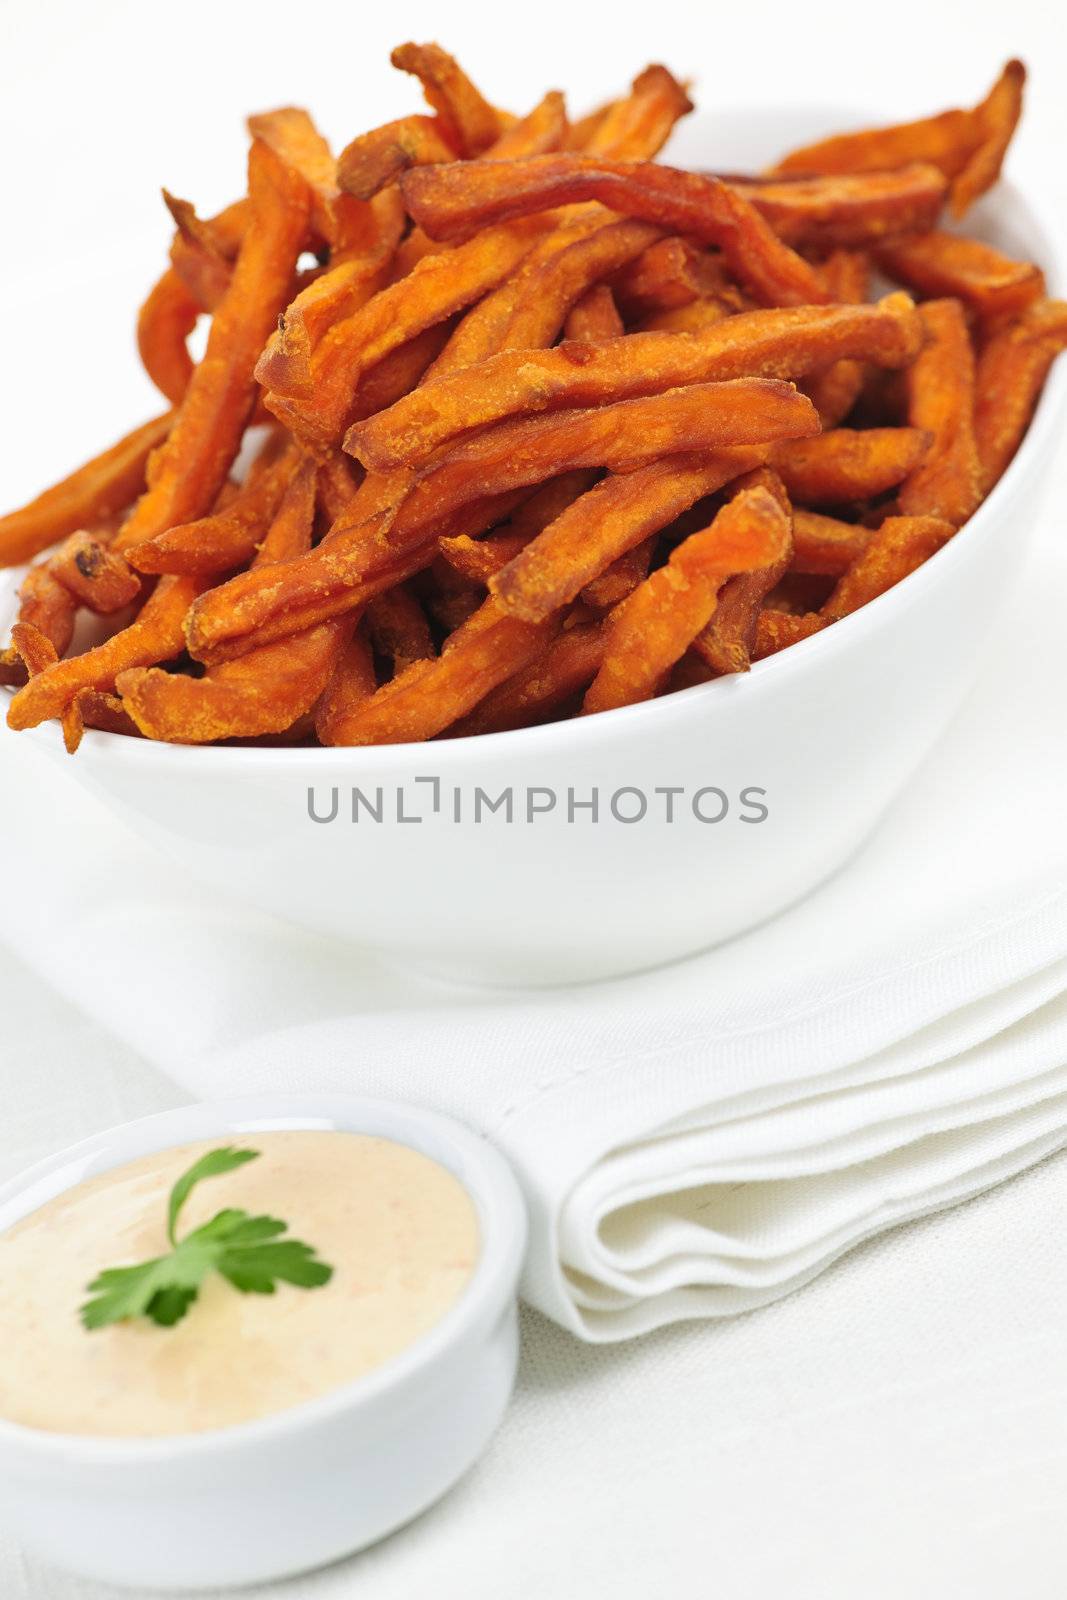 Sweet potato fries with sauce by elenathewise